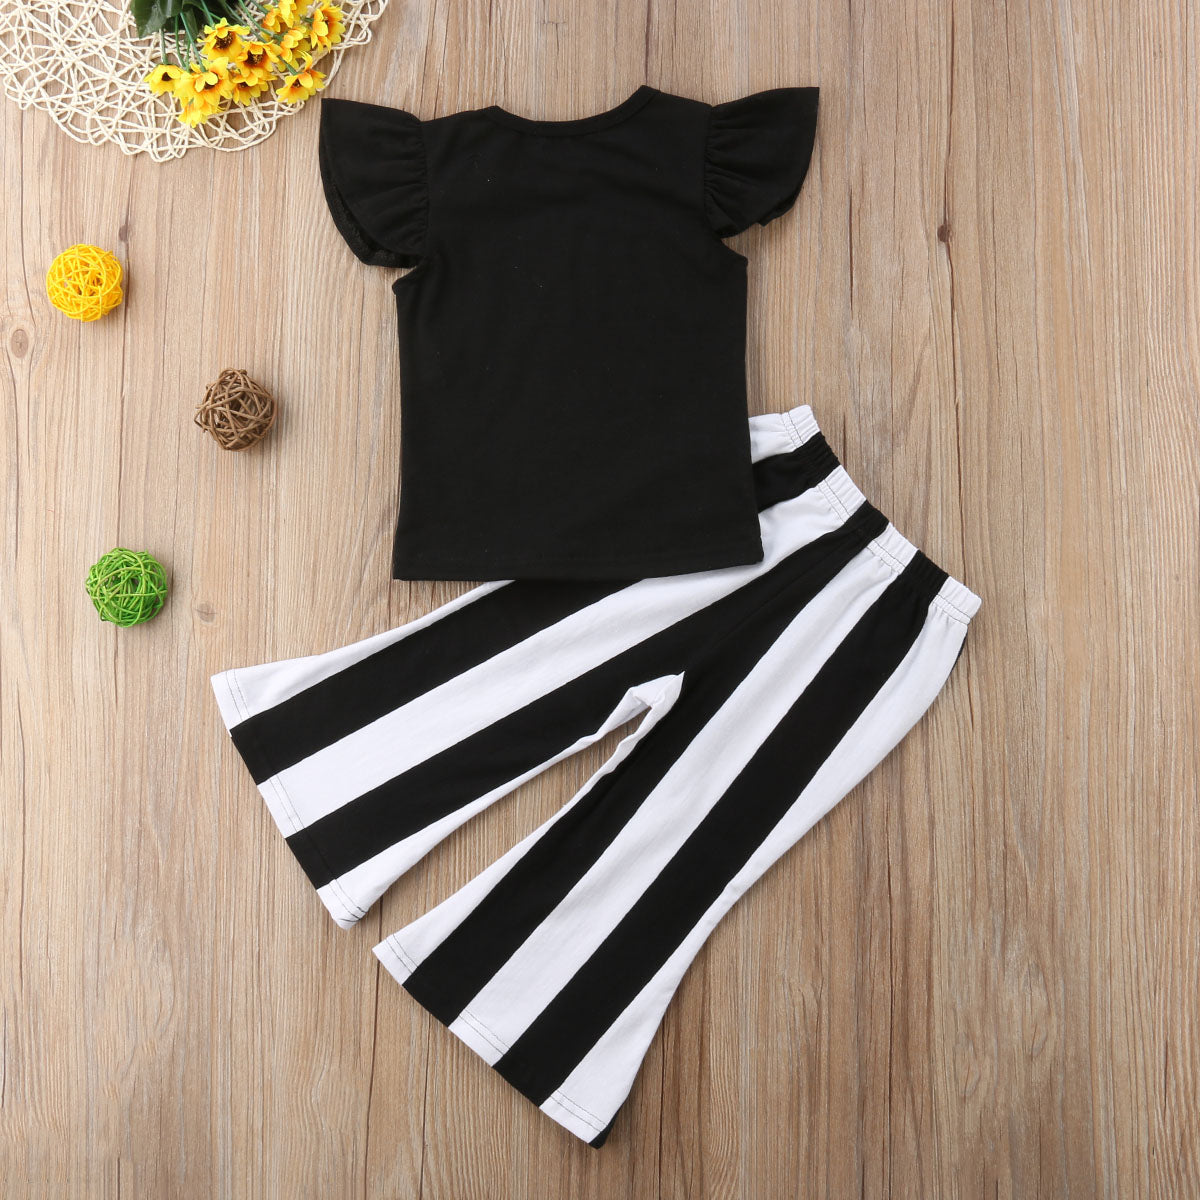 Flory girl fashion outfit with striped shirt and trousers